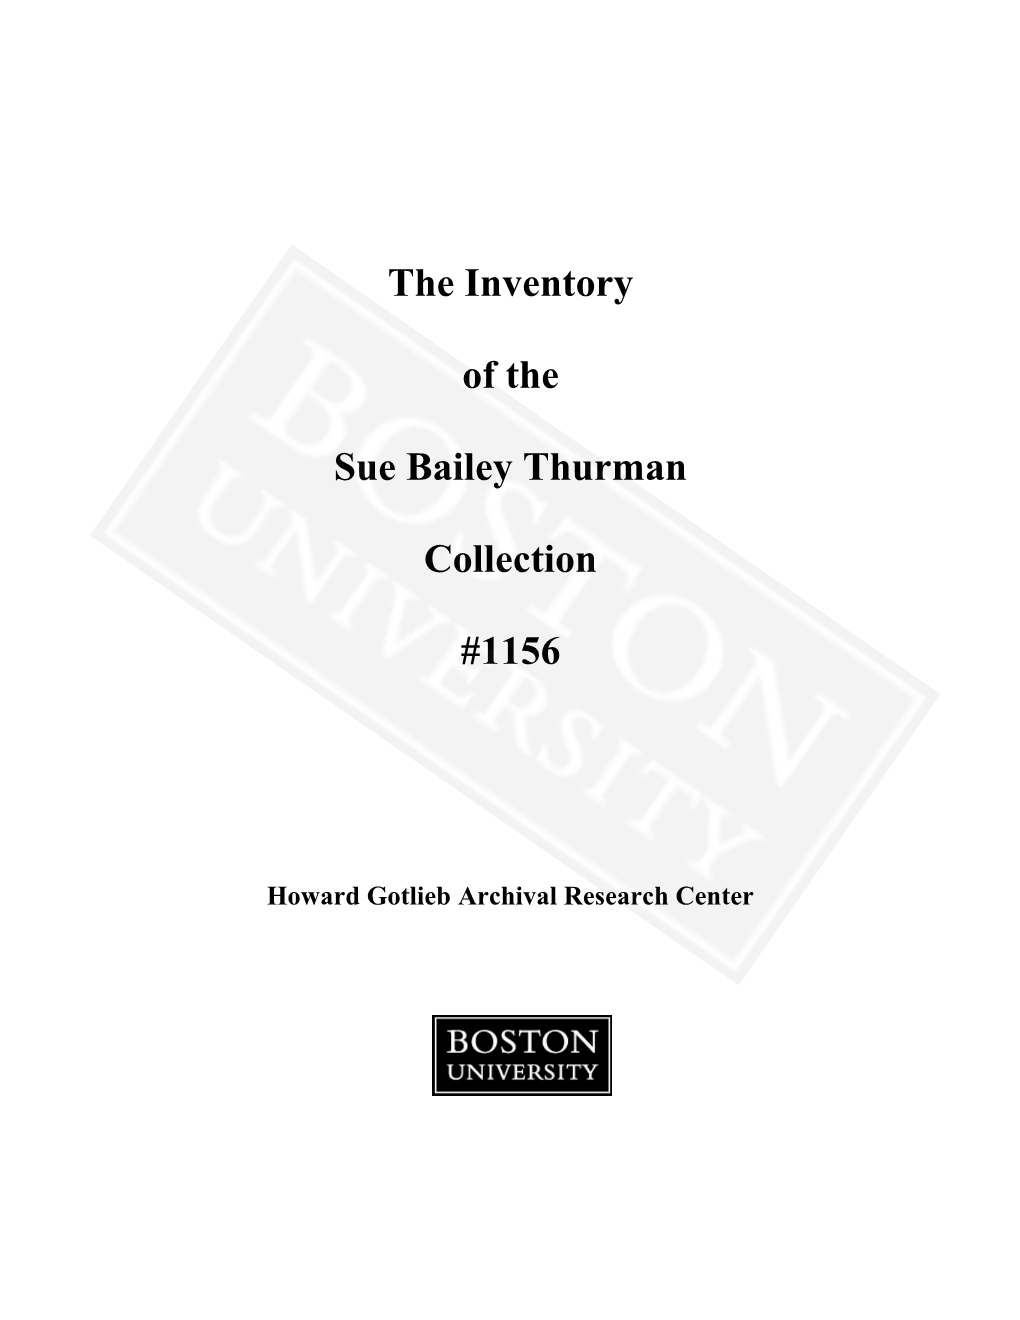 The Inventory of the Sue Bailey Thurman Collection #1156